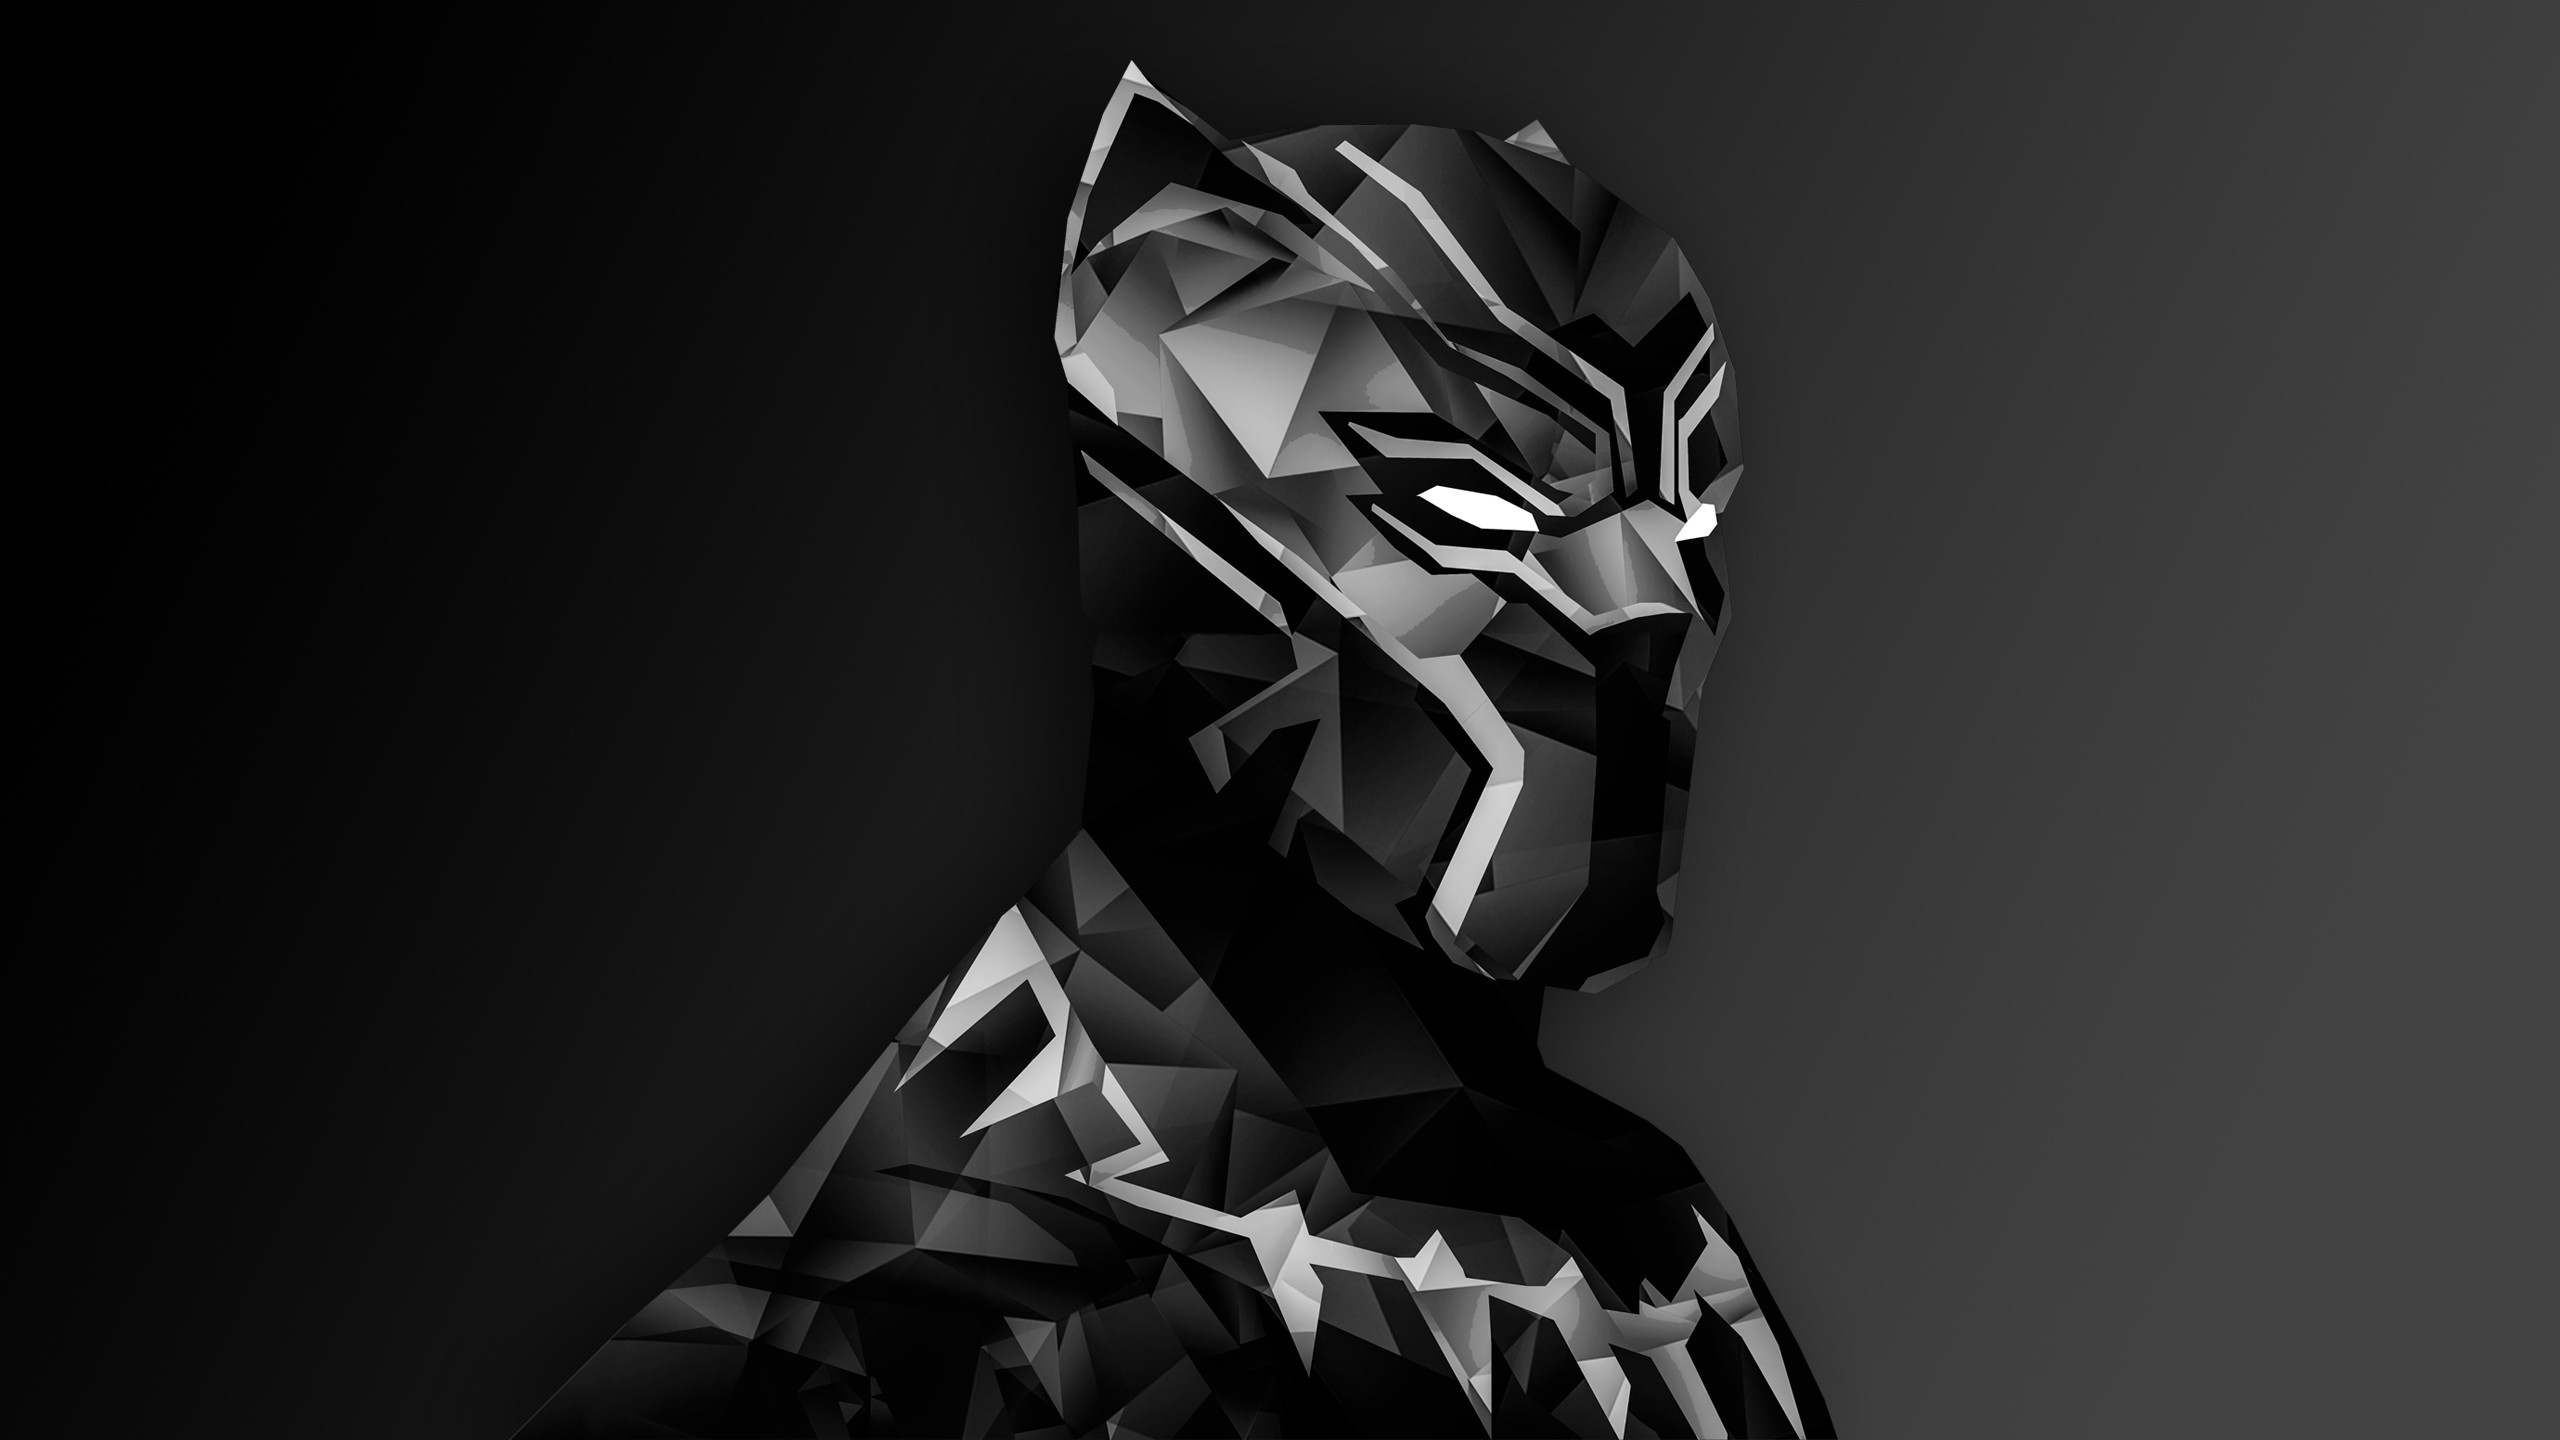 Black Panther Wallpapers (67+ pictures)